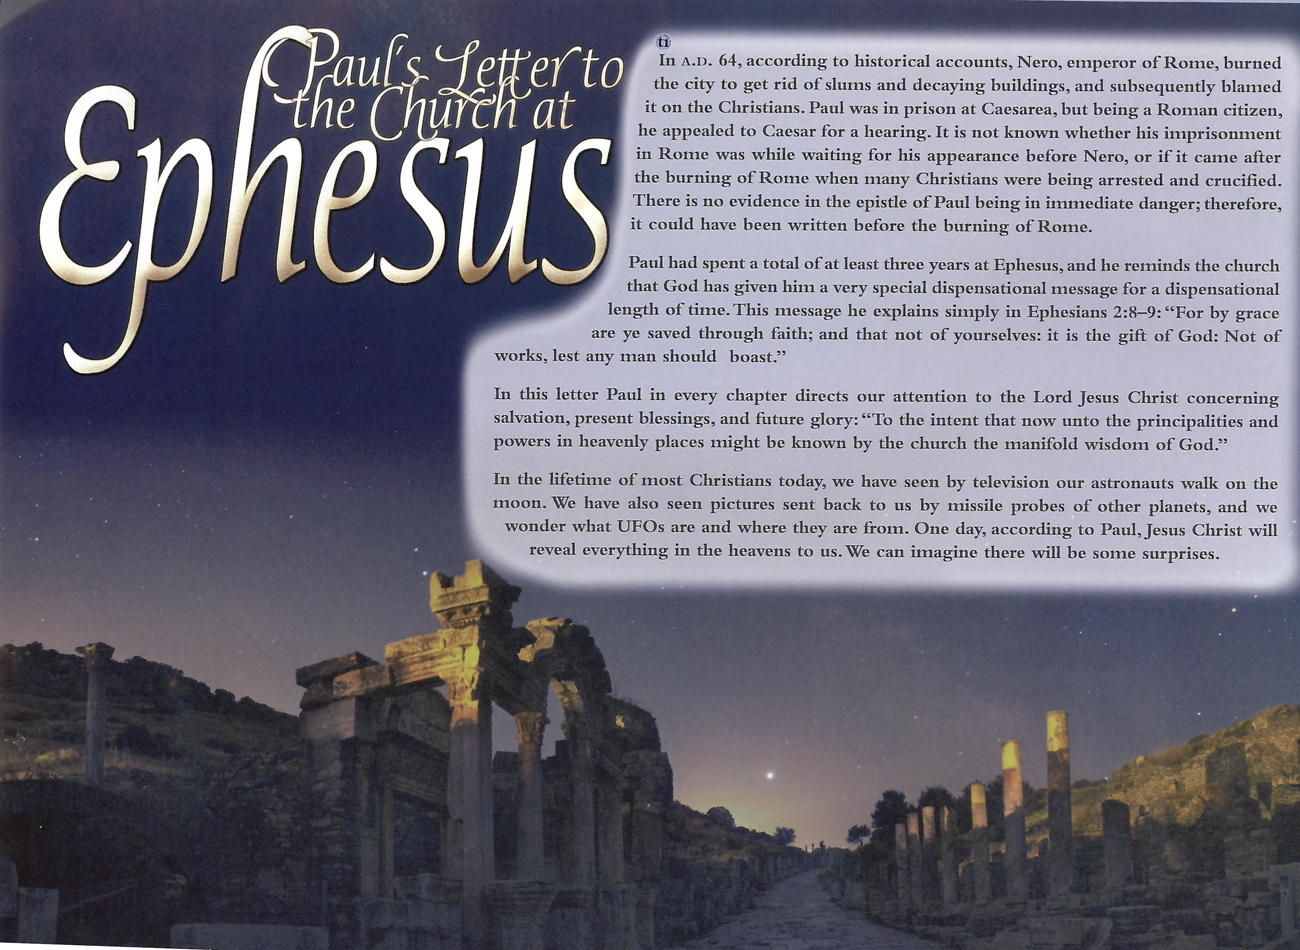 2012 Prophecy Calendar: May - Paul's Letter to the Church at Ephesus